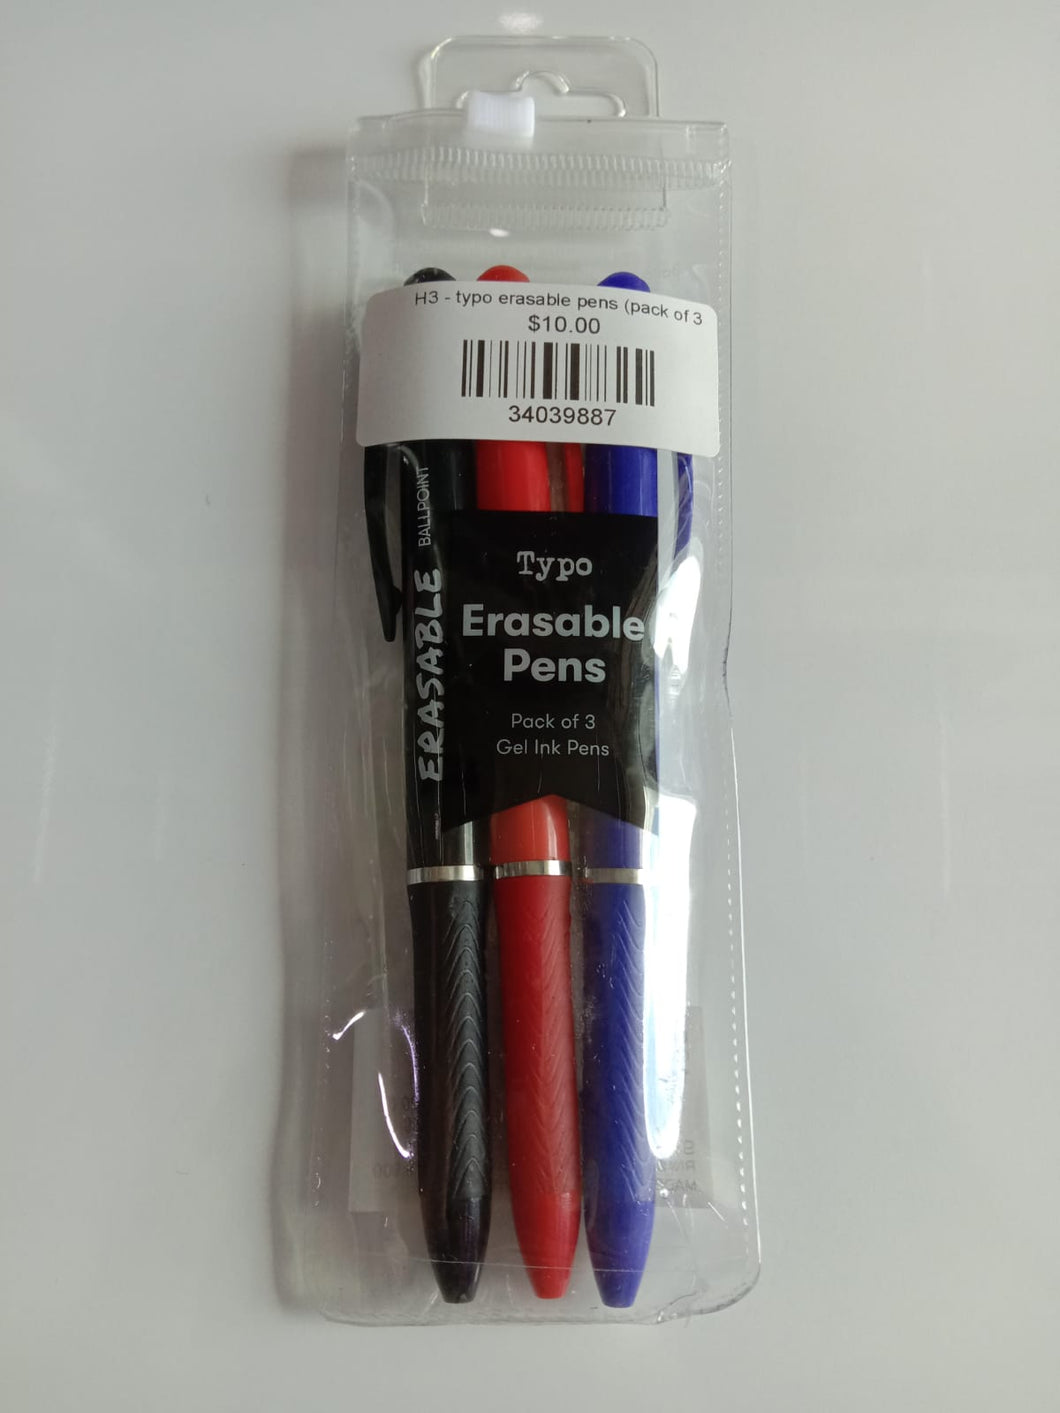 H3 - typo erasable pens (pack of 3)